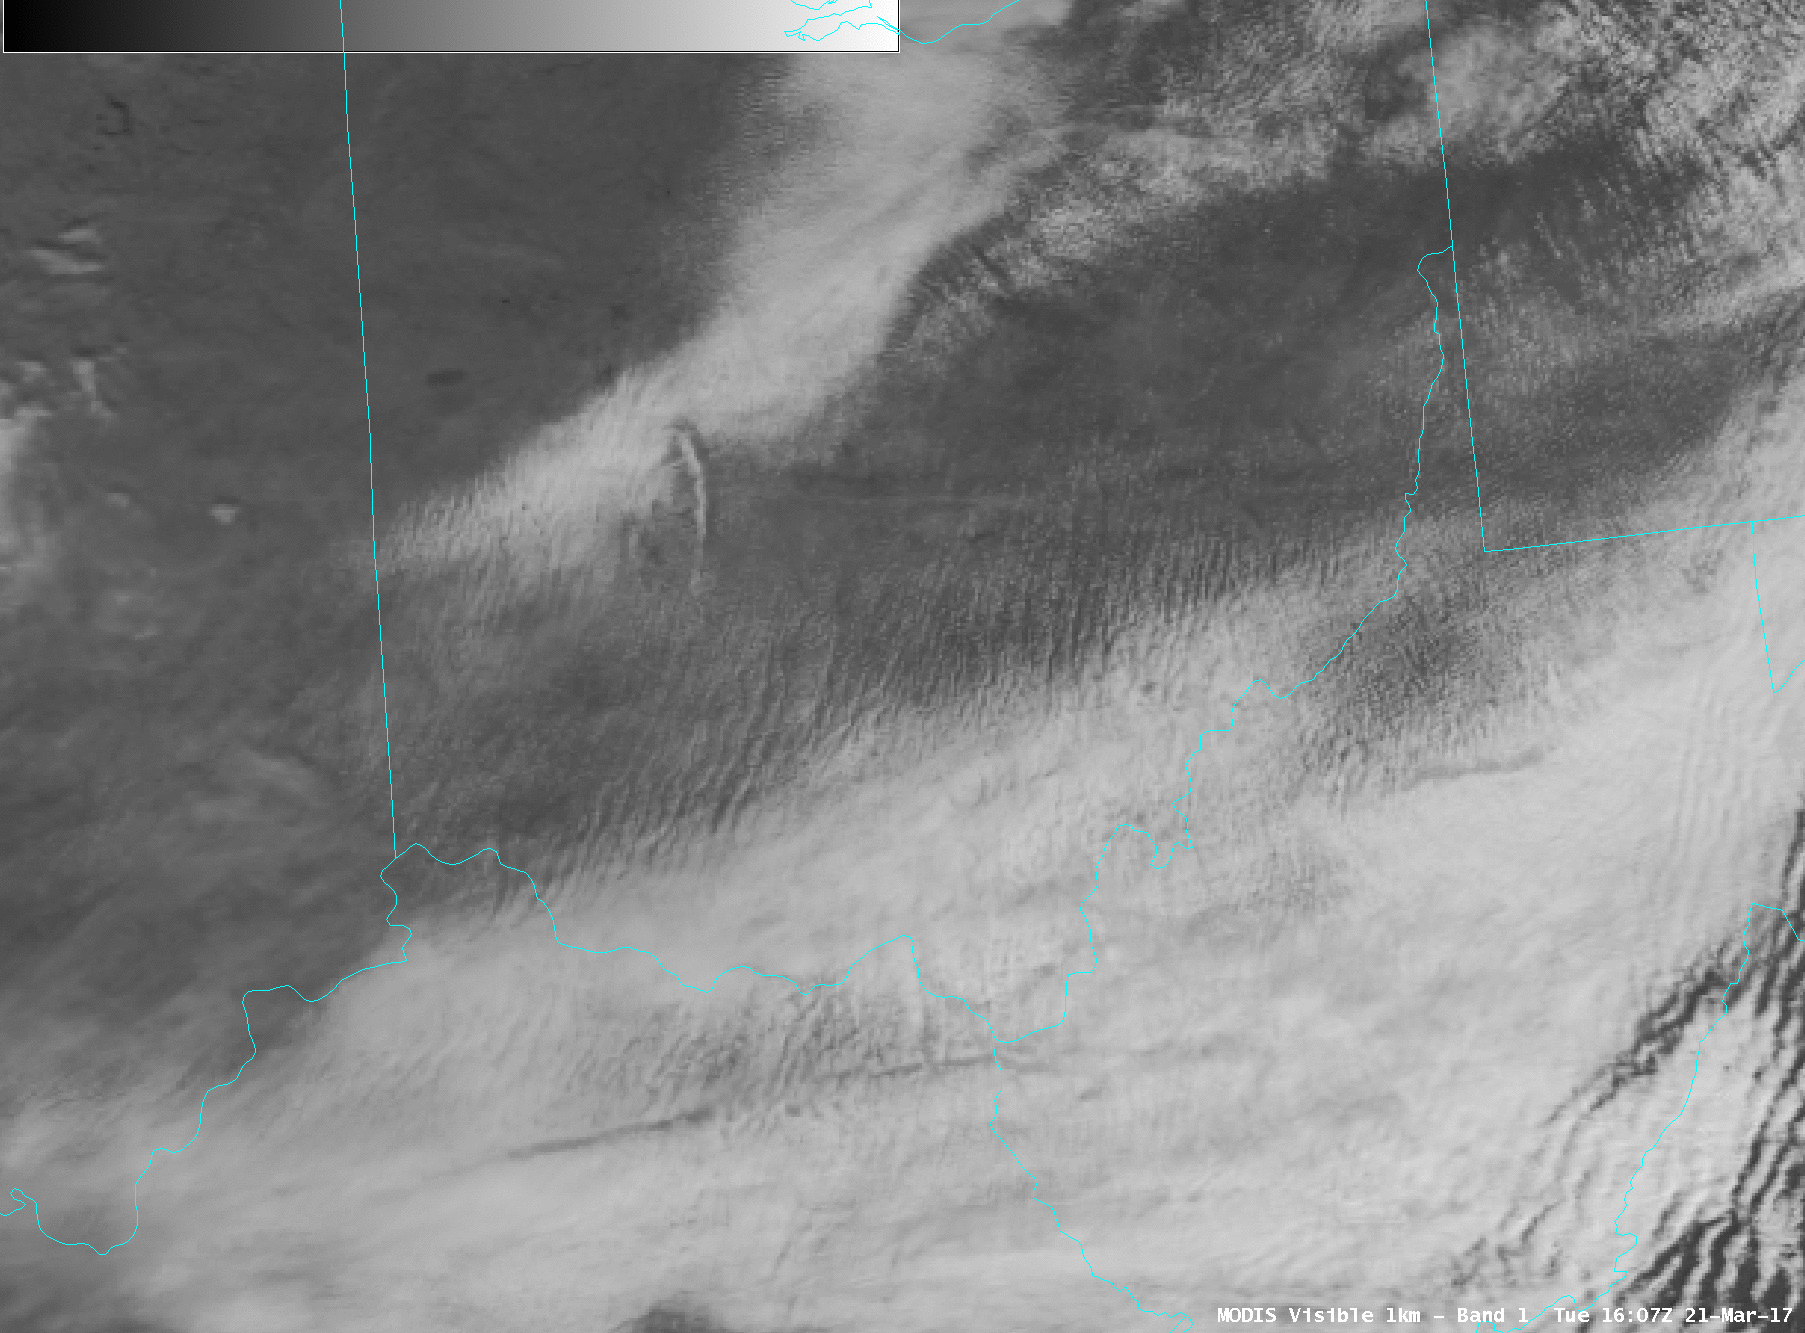 Terra MODIS Visible (0.65 µm) and Cirrus (1.375 µm) images [click to enlarge]